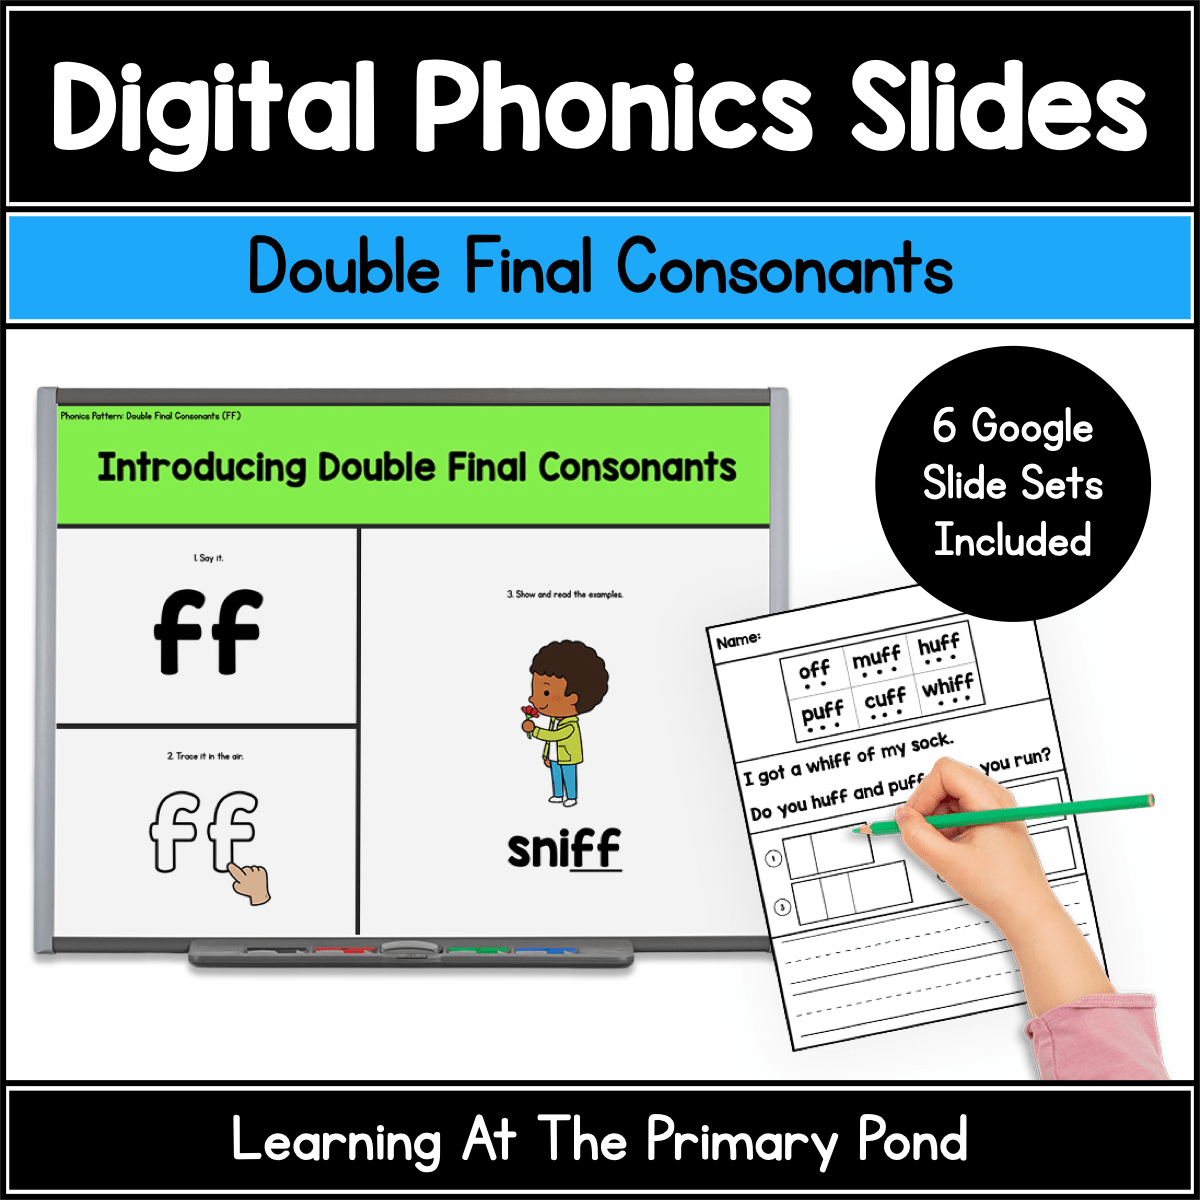 Double Final Consonants Phonics Slides | FLOSS Rule | Google Slides Phonics - Learning at the Primary Pond